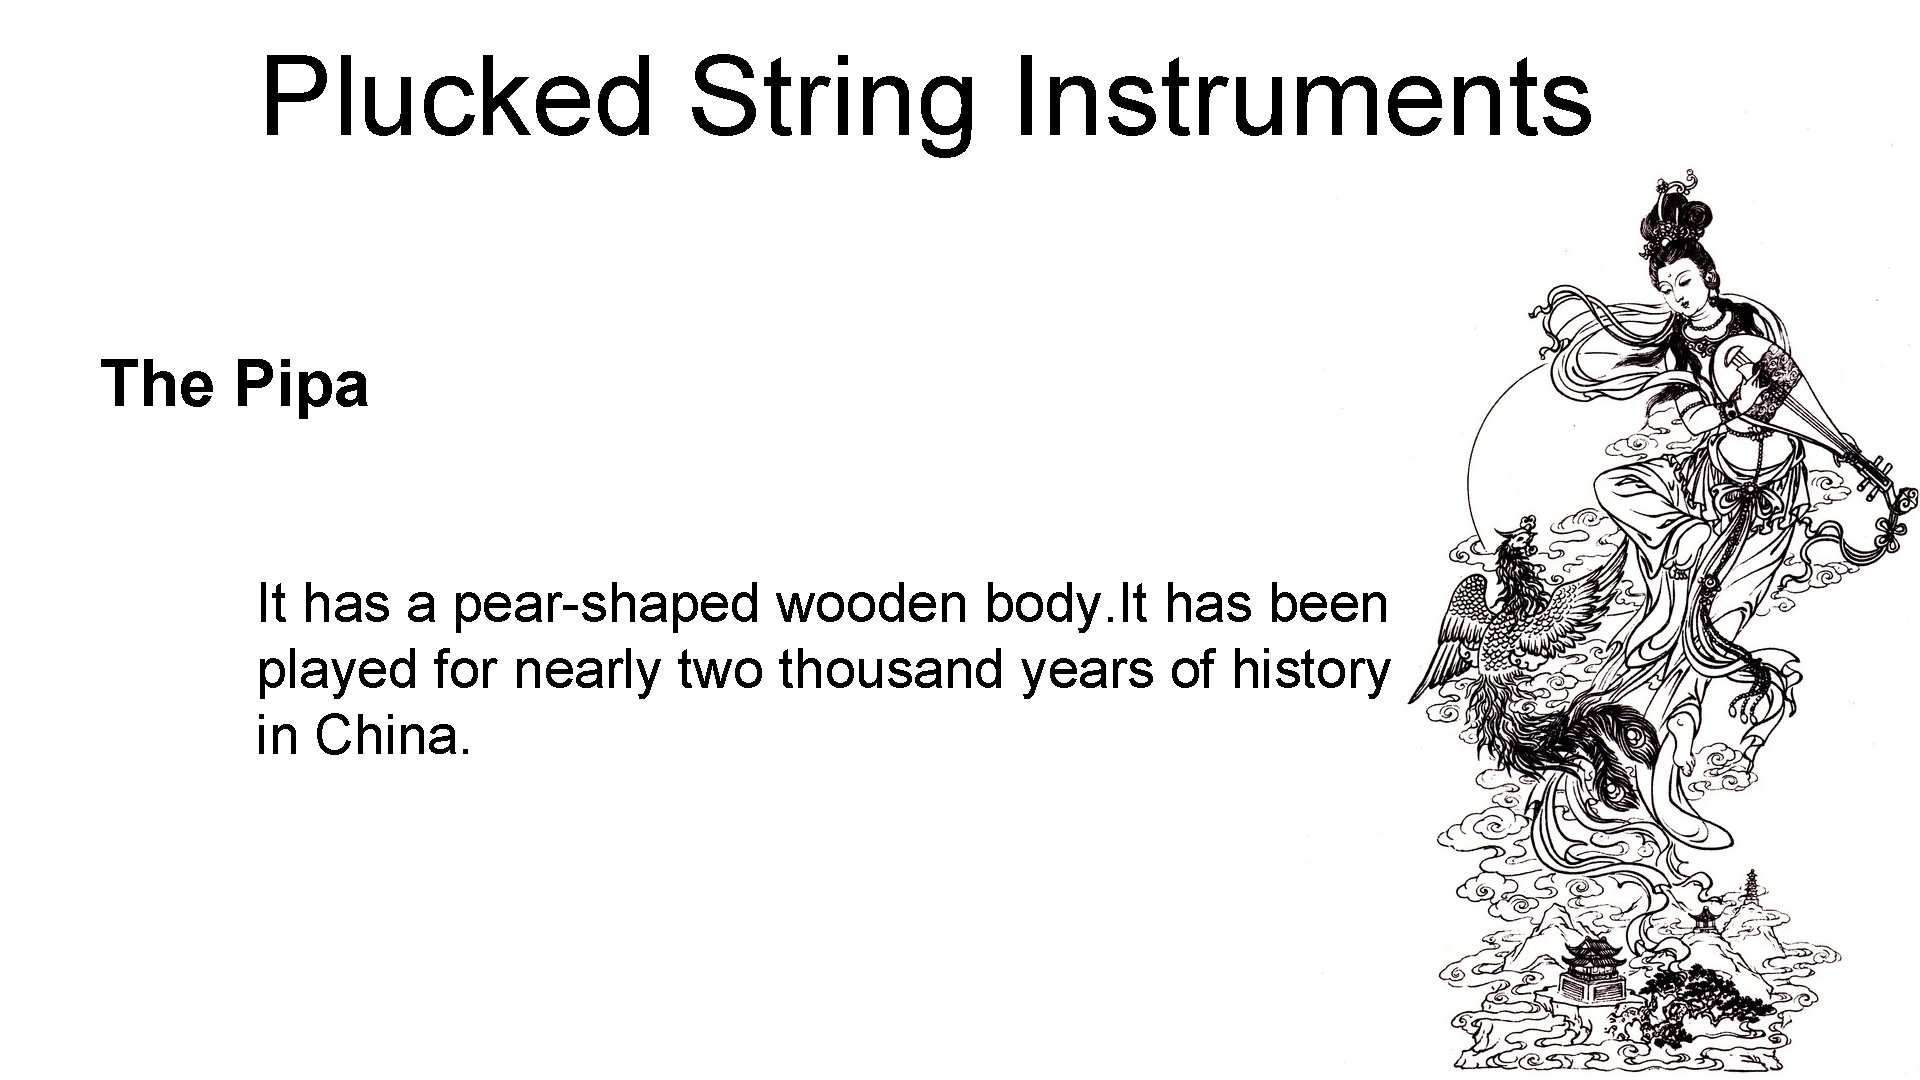 Plucked String Instruments The Pipa It has a pear-shaped wooden body. It has been